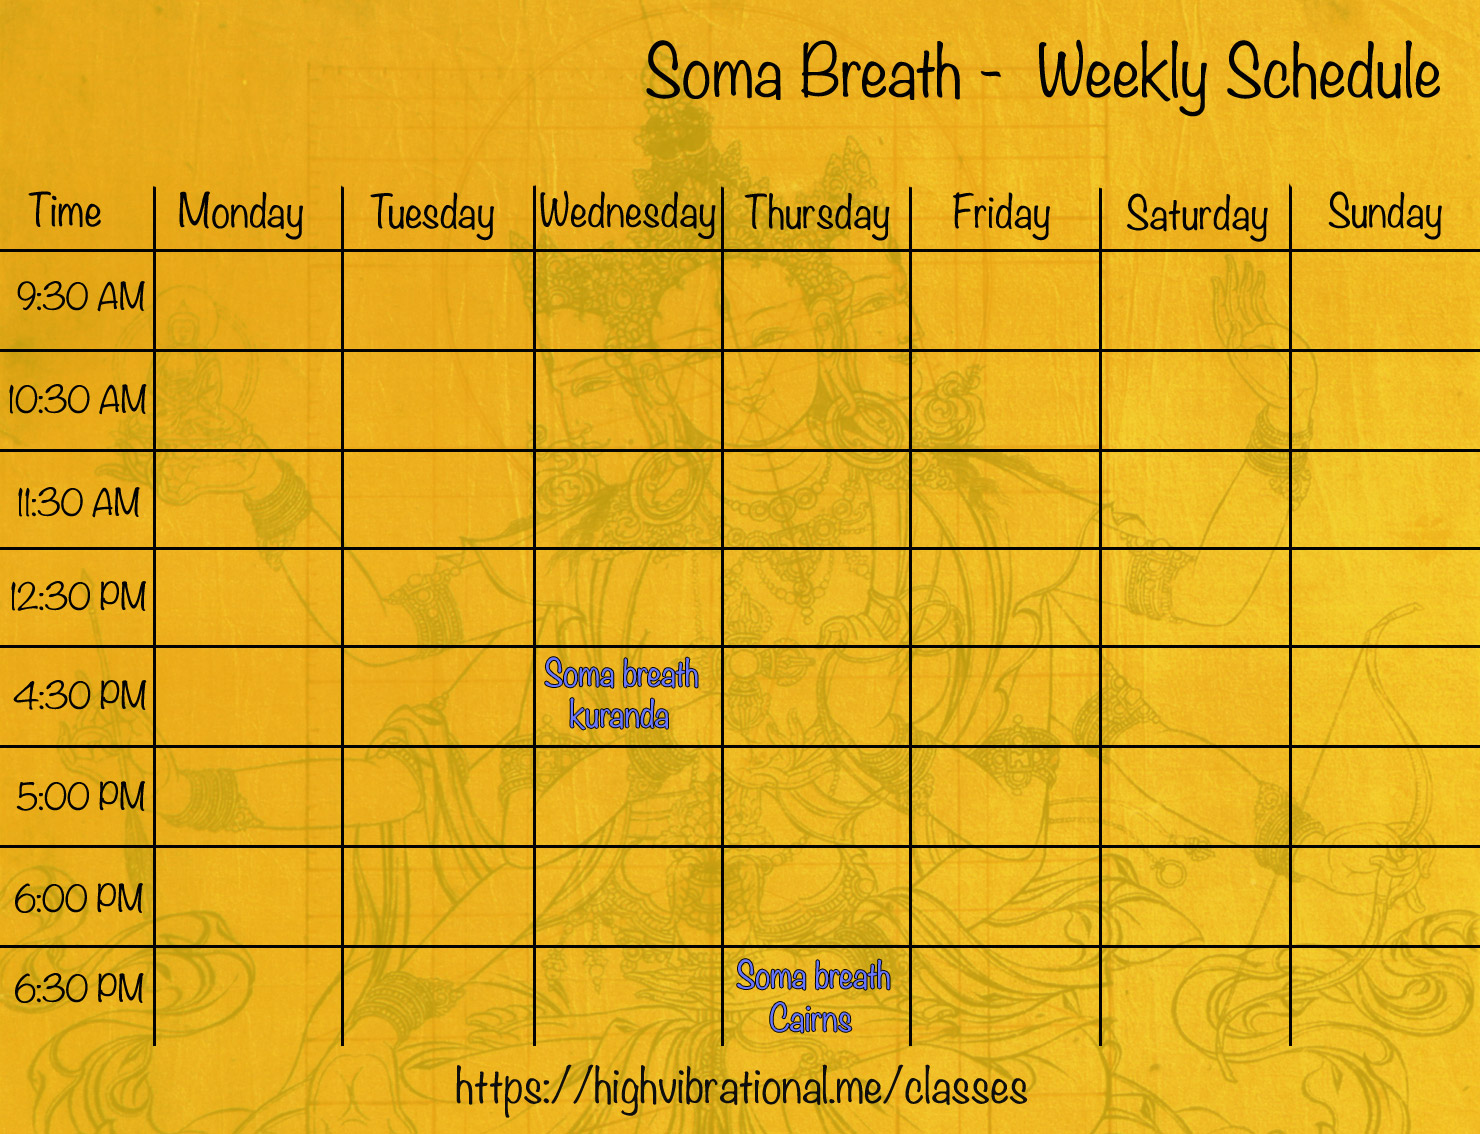 Weekly Classes Schedule Soma Breath in Kuranda and Cairns, QLD